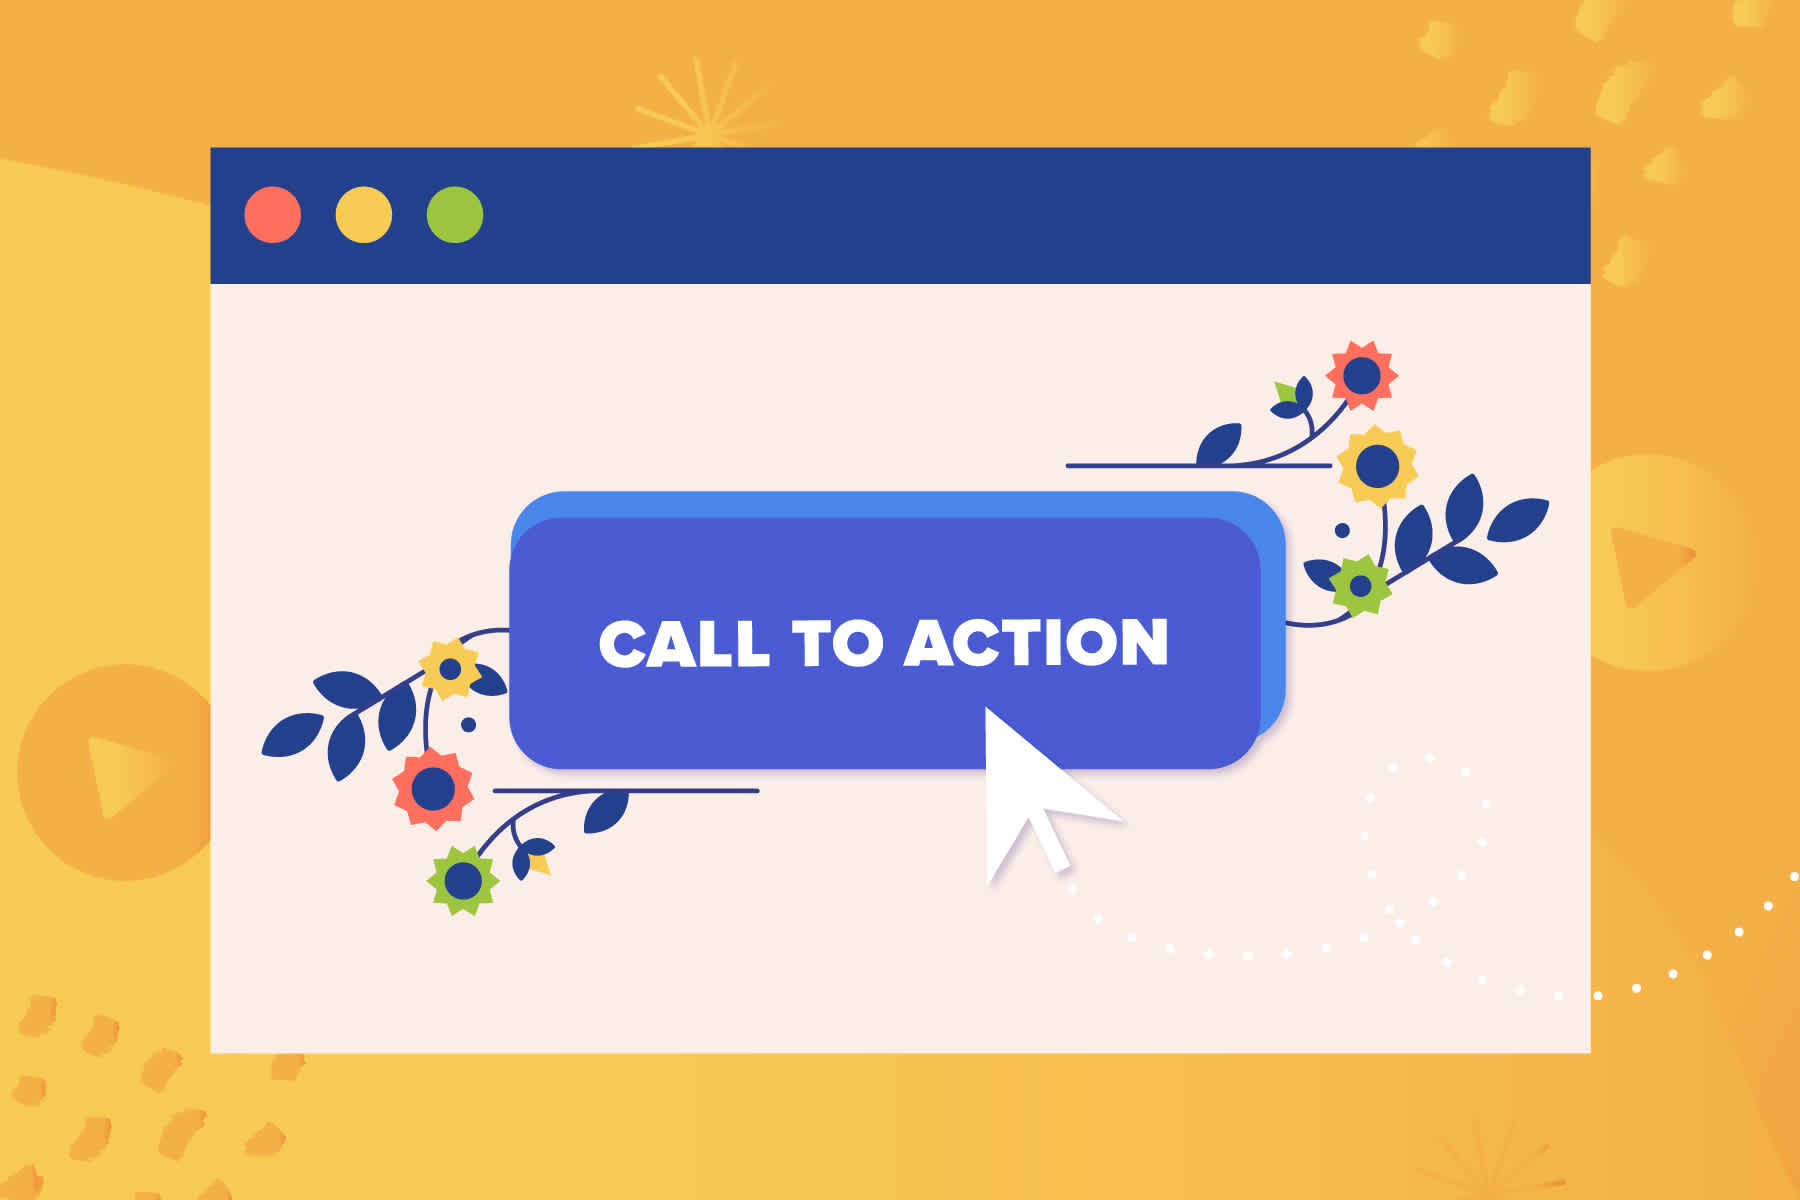 Incorporate A Call-To-Action (CTA)